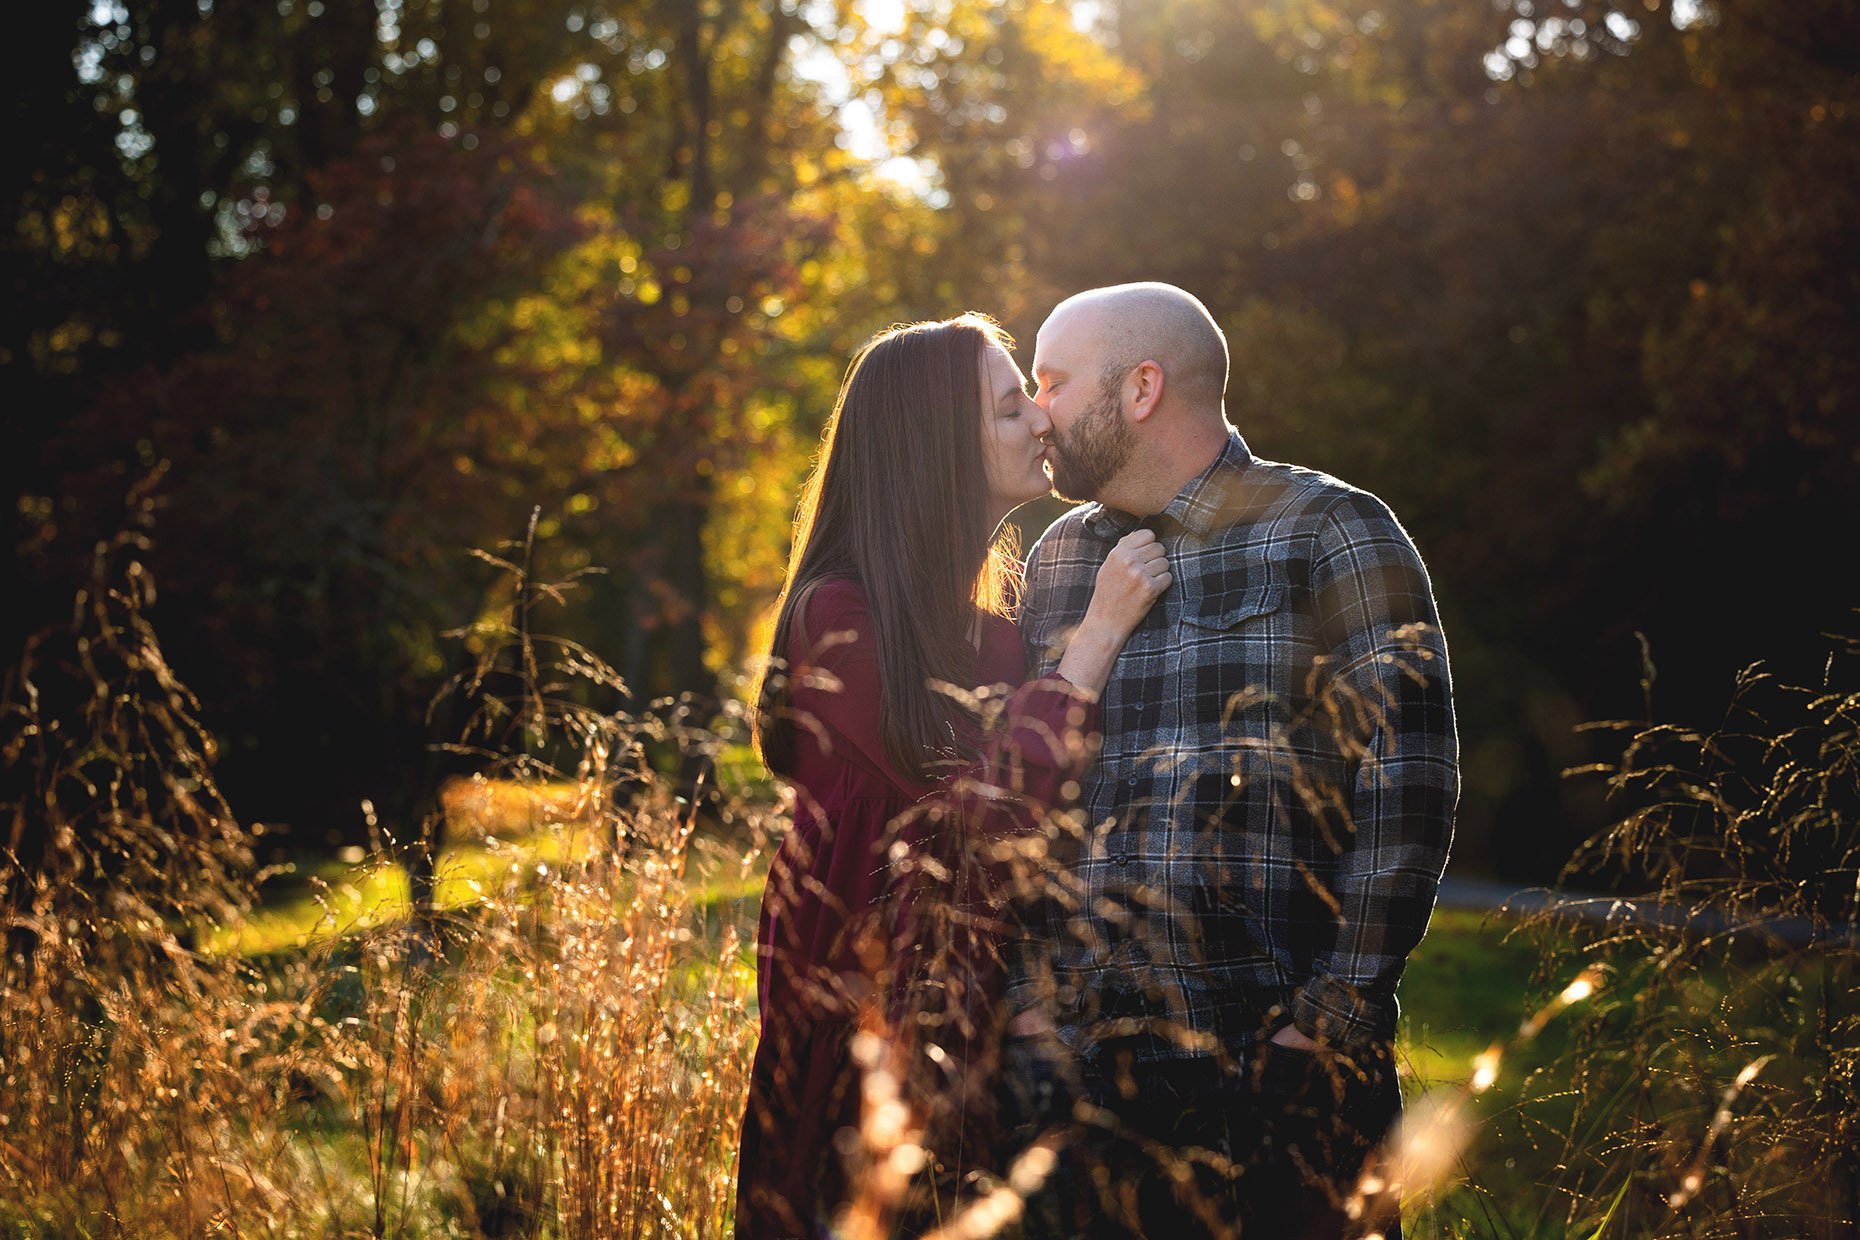 Couple kissing in grassy field